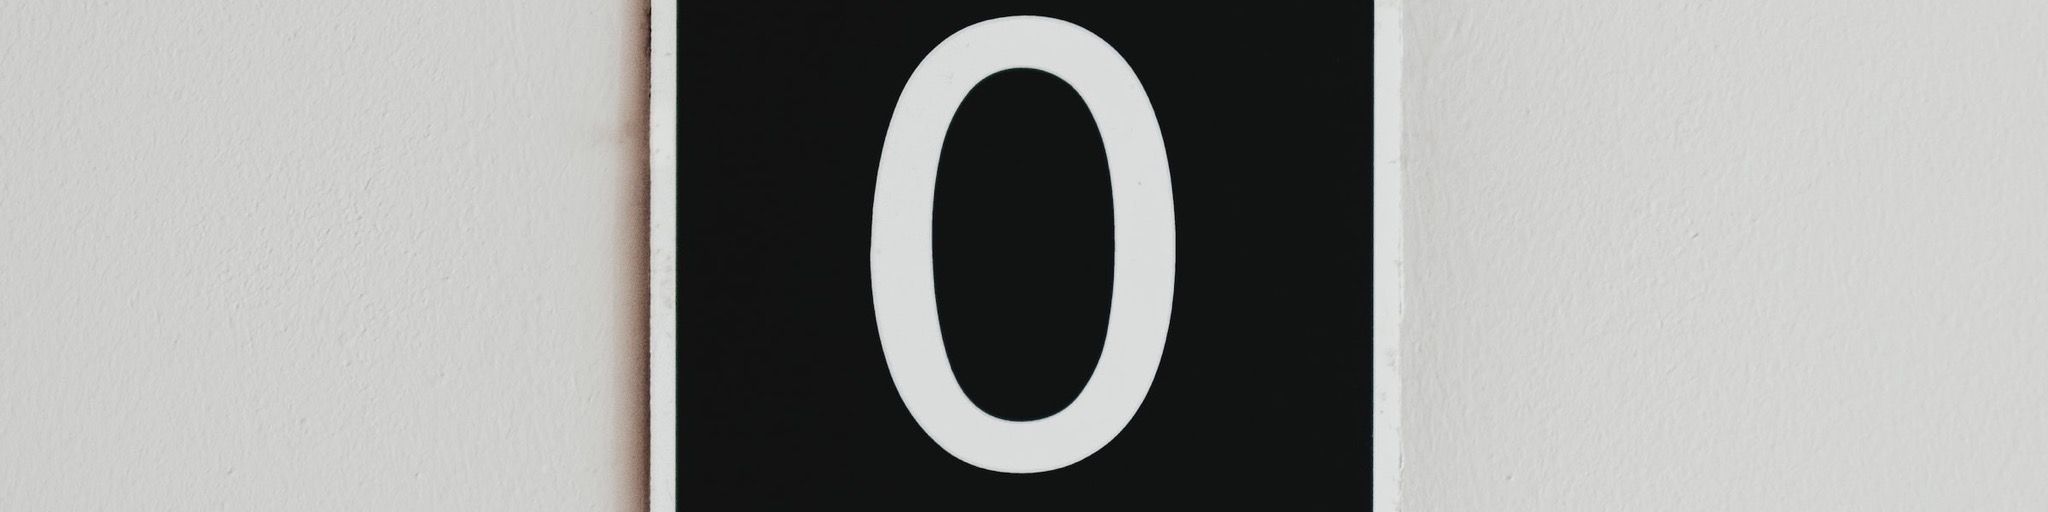 A zero on a sign on the wall